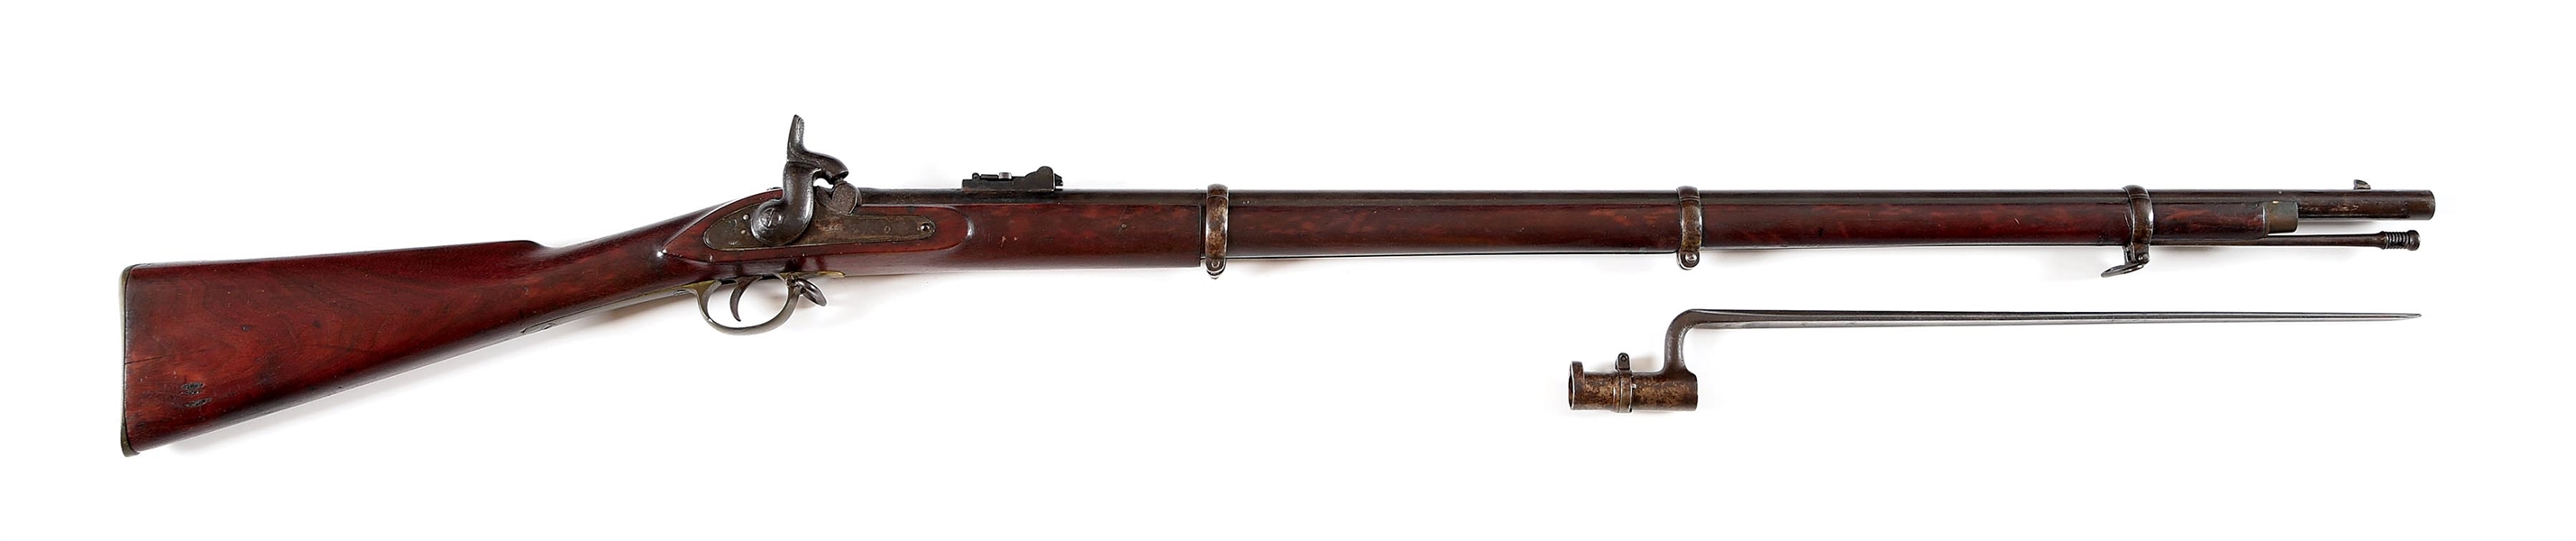 (A) SCARCE AND FINE IDENTIFIED JP MOORE P1853 RIFLE MUSKET WITH BAYONET OF JONATHAN L. ALLISON, 165TH PA AND 101ST PA.